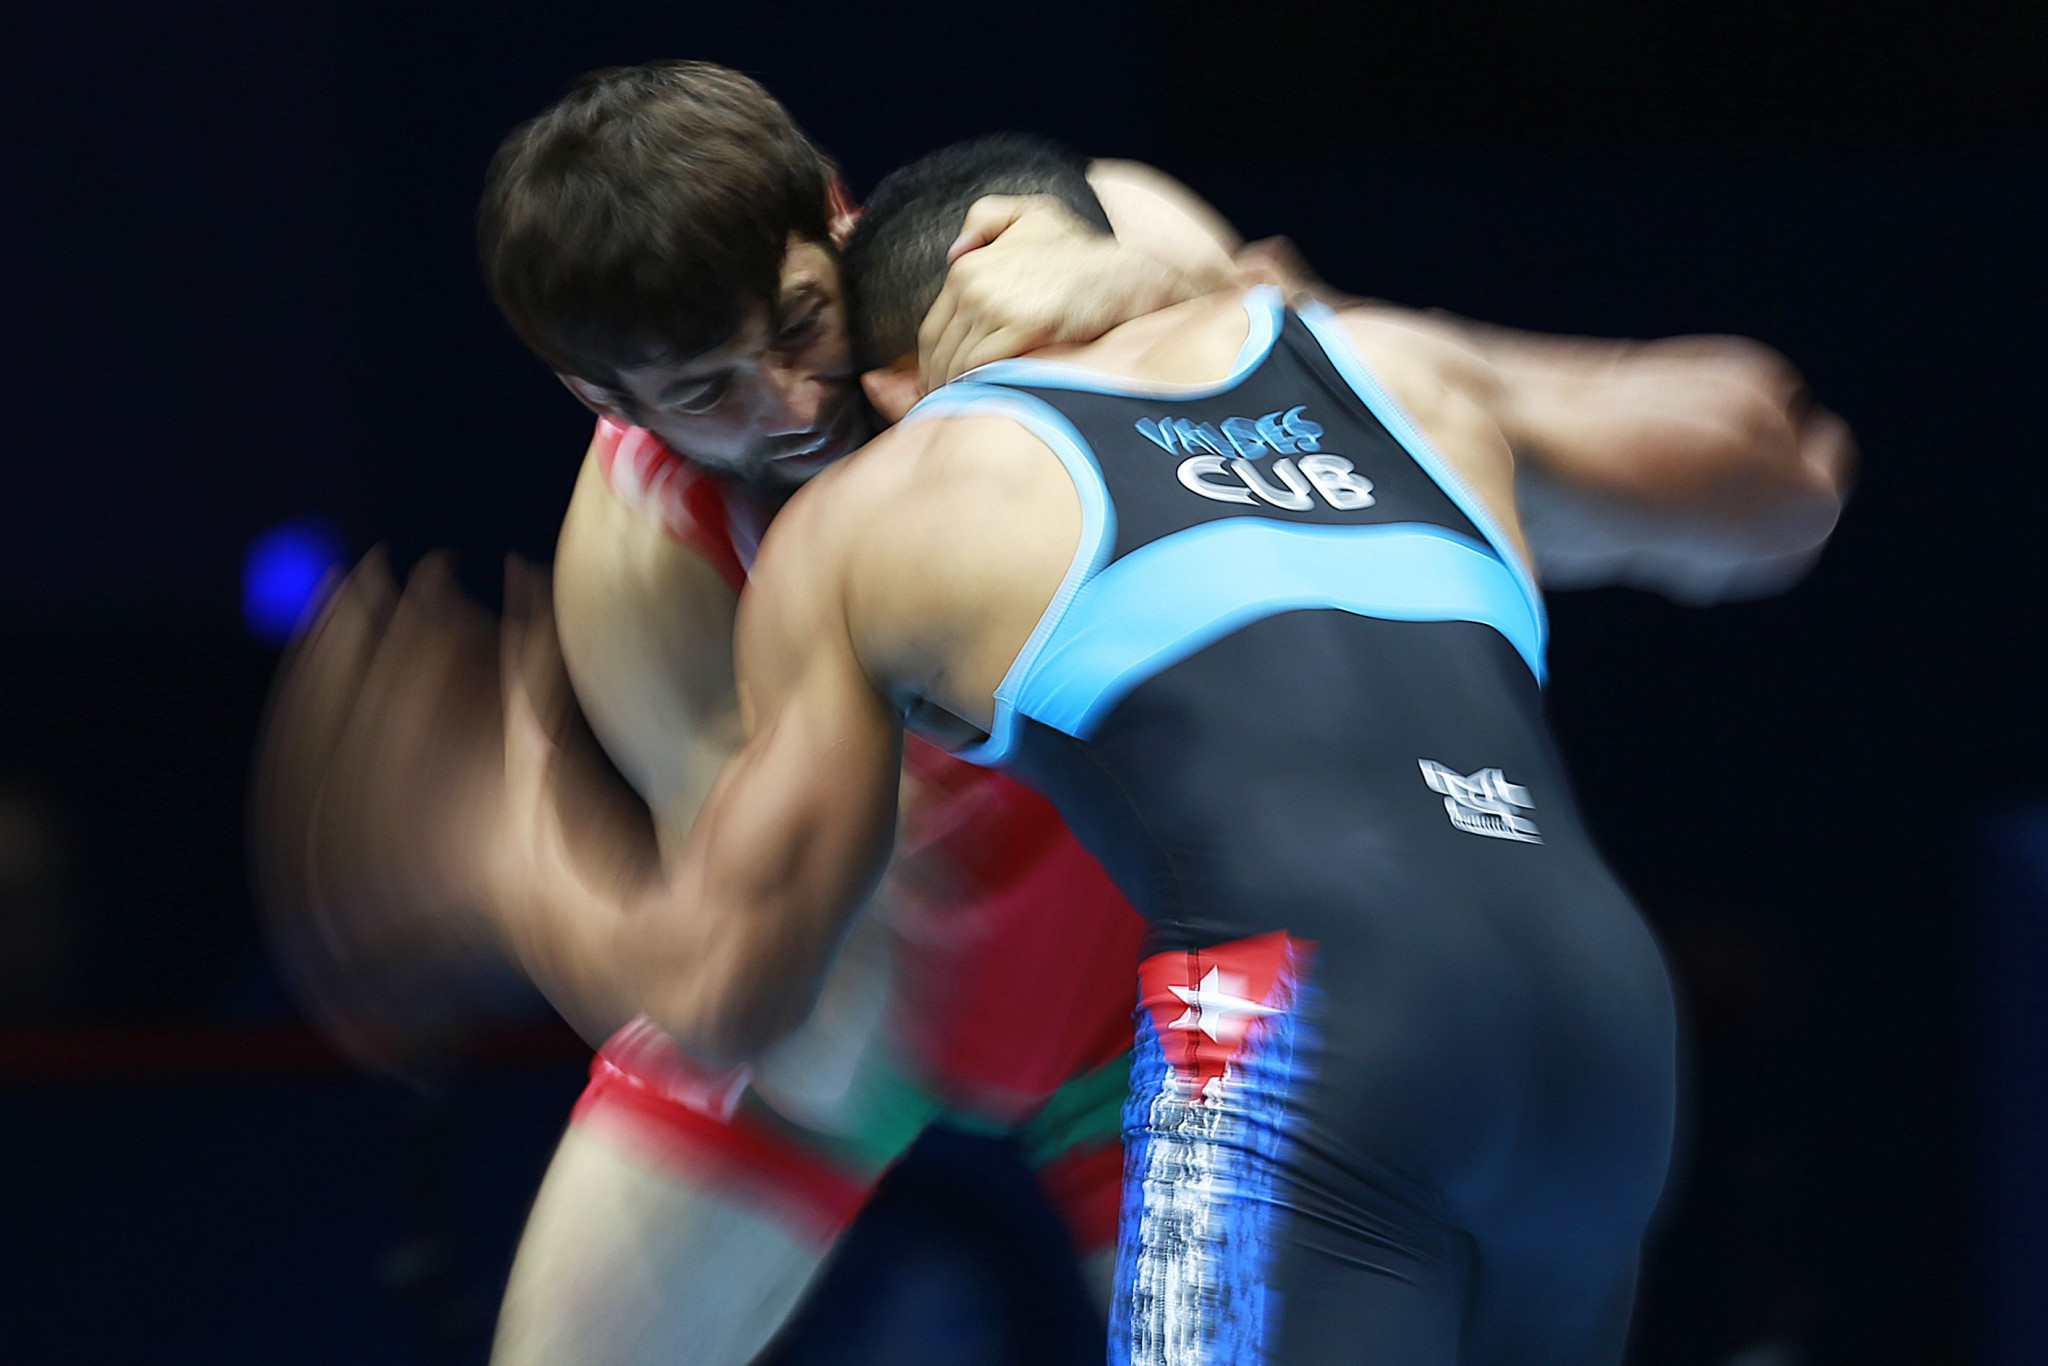 Cuban wrestling has been boosted by the UWW assistance programme ©Getty Images